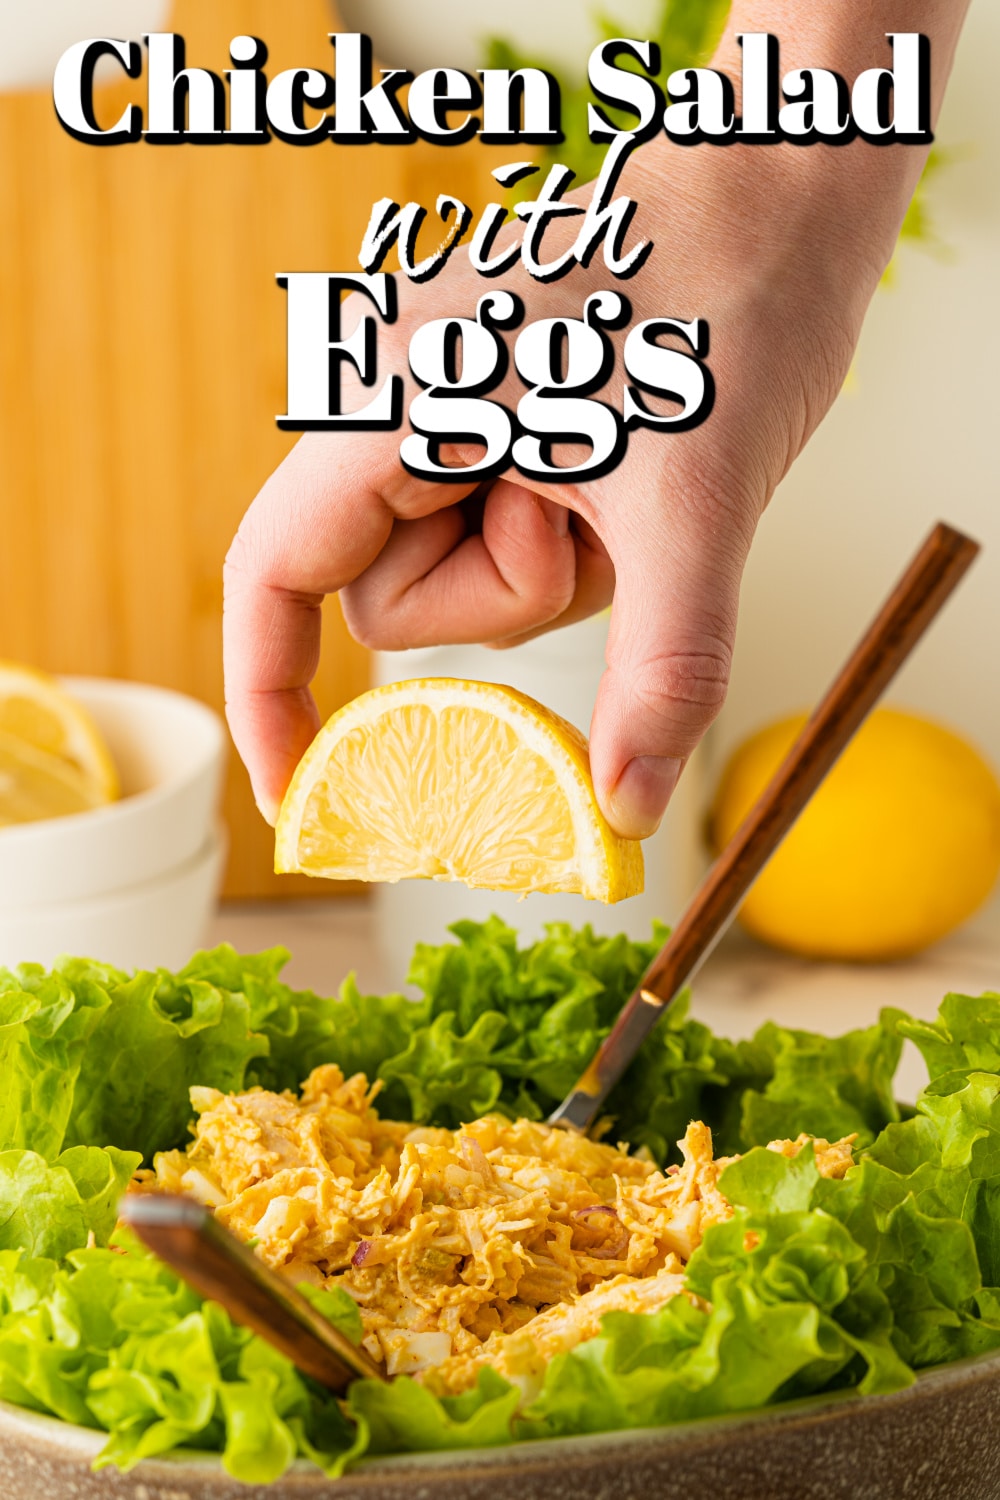 Chicken Salad Recipe with Eggs Pin.